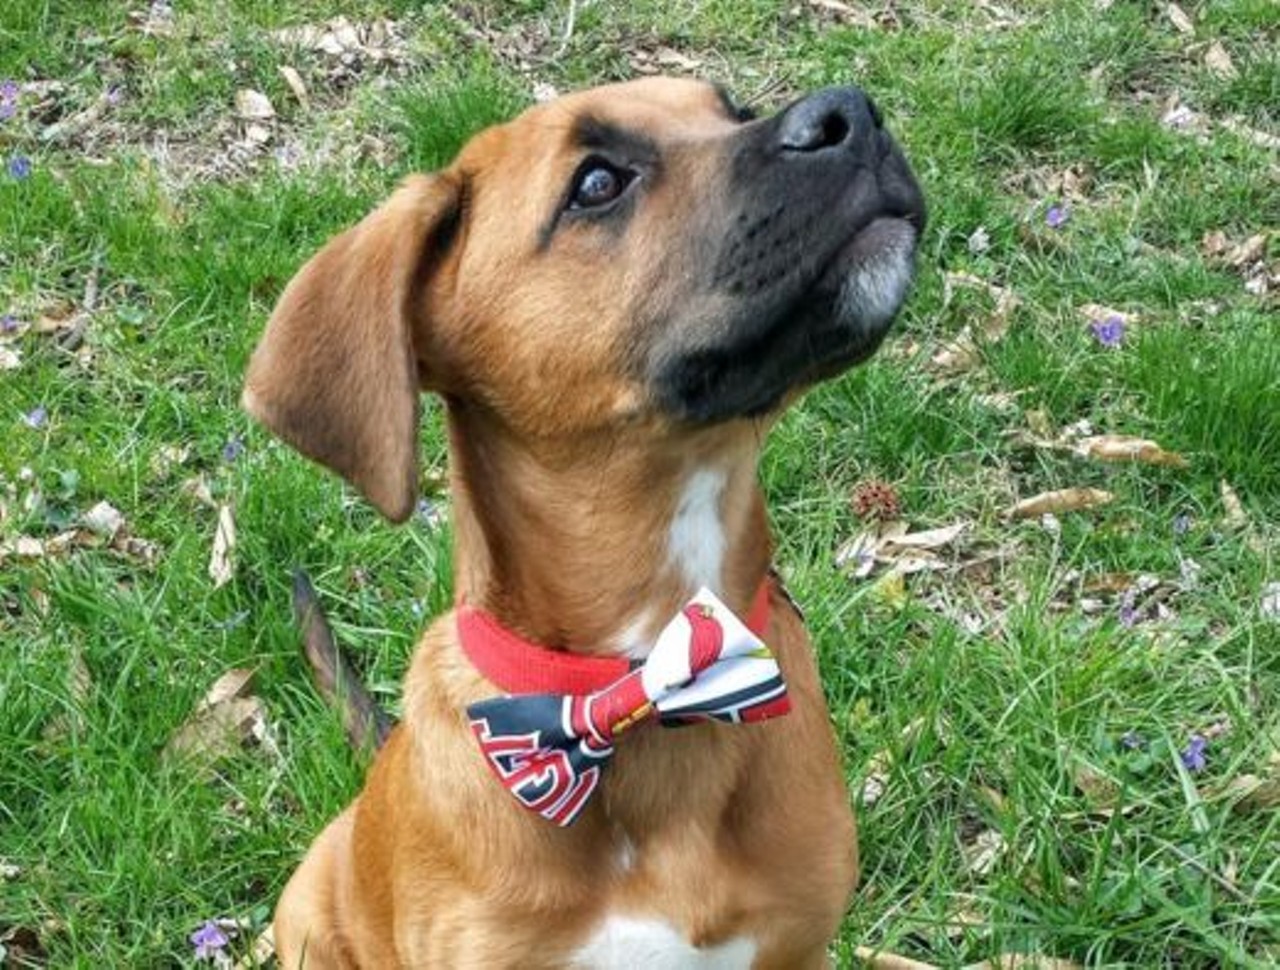 This dog is looking dapper in a Cardinals bow tie. Photo courtesy of Instagram / brindle.bar.